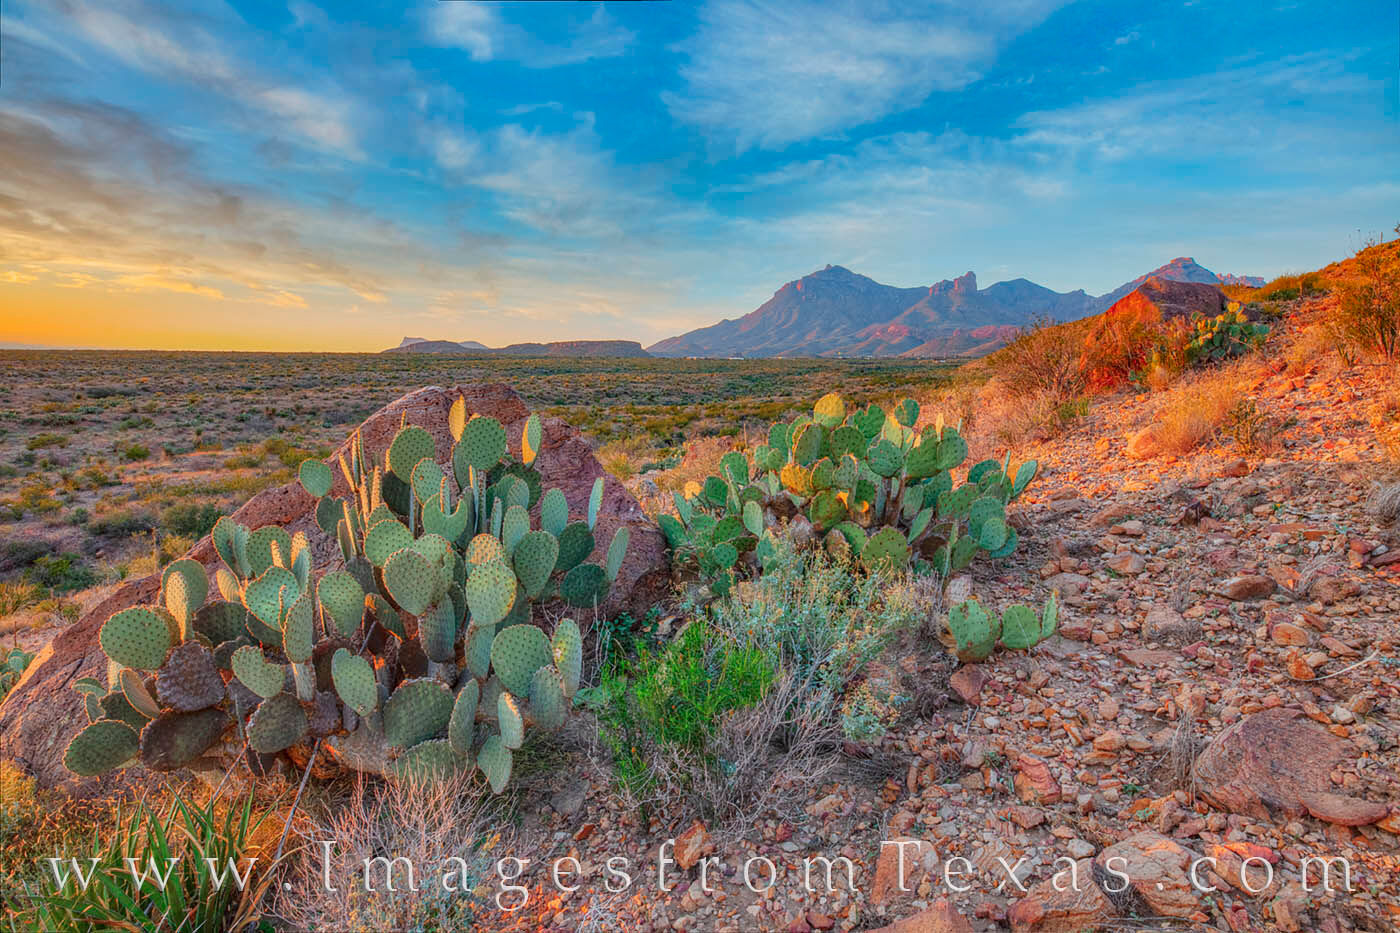 This Big Bend photo was taken near the Lone Mountain Trail in Big Bend National Park. The Chisos Mountains are visible in the...